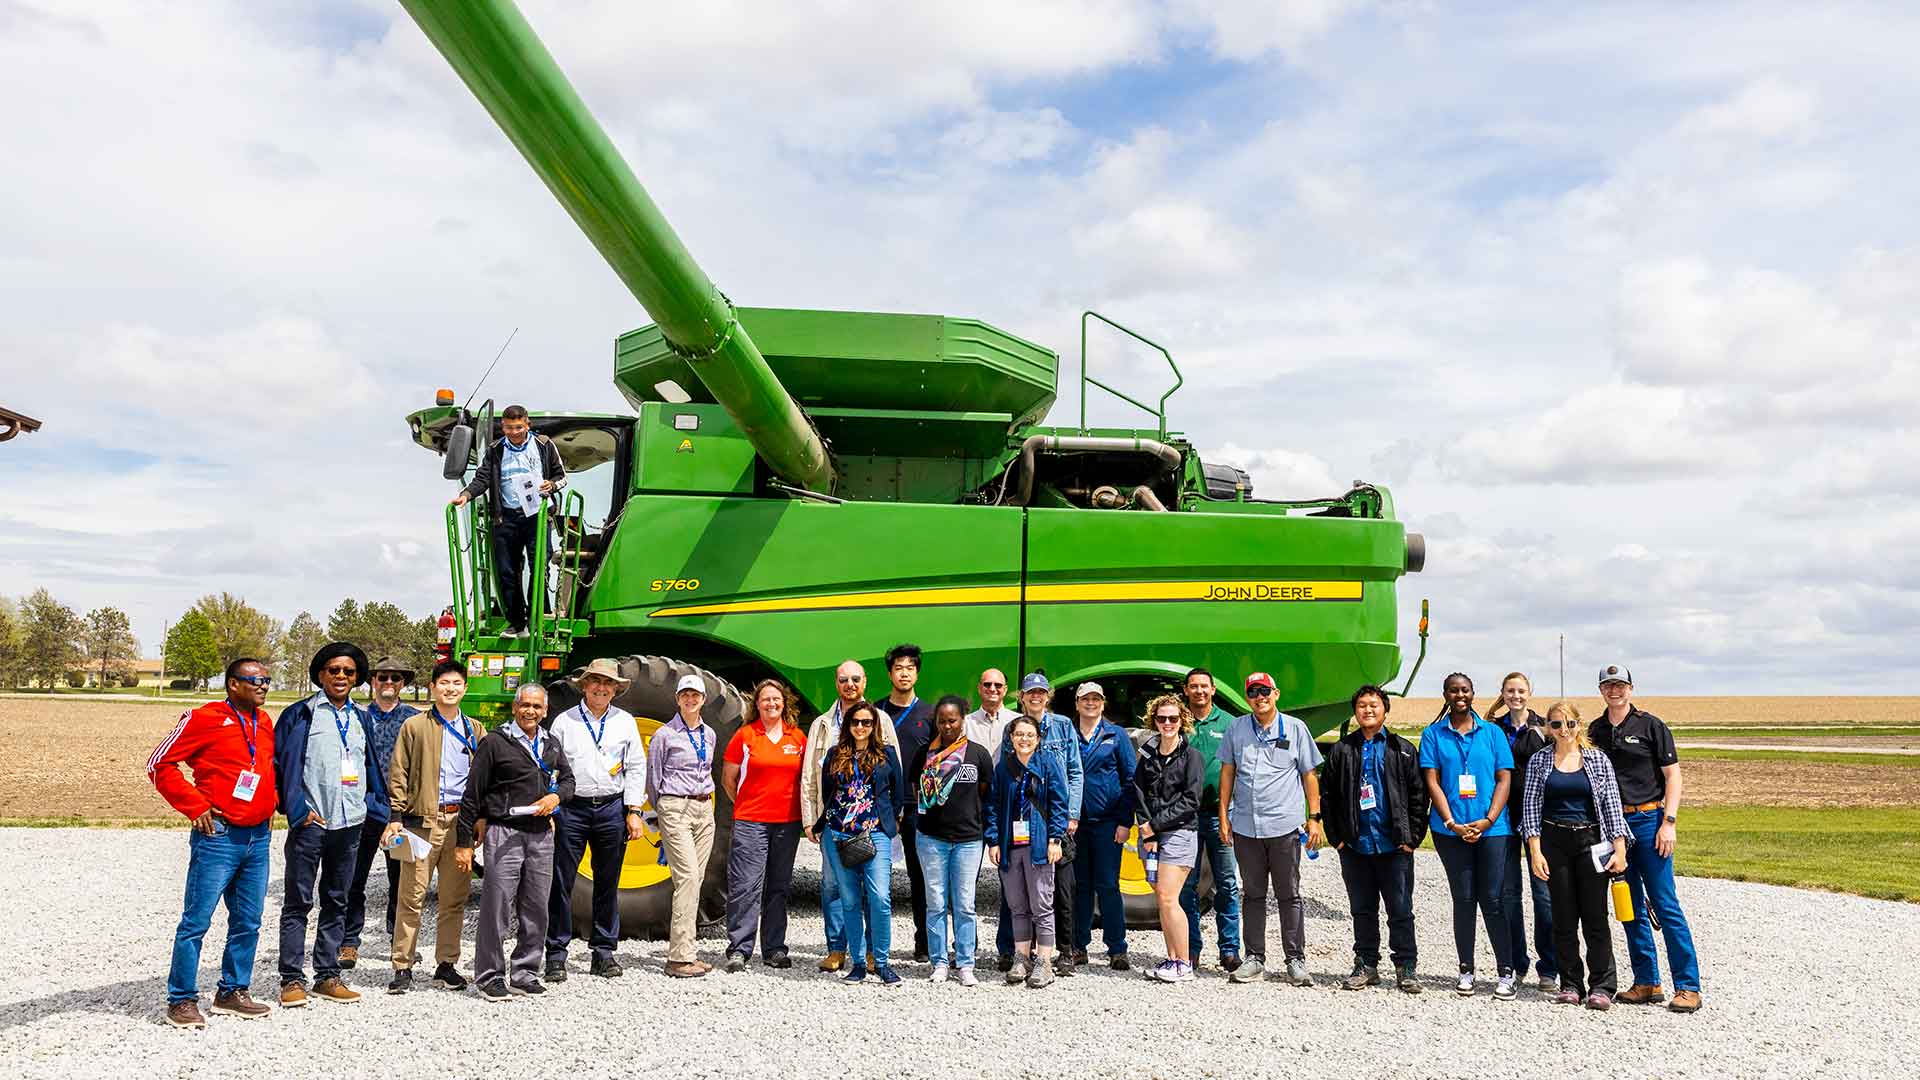 Group photo in front of agriculture combine